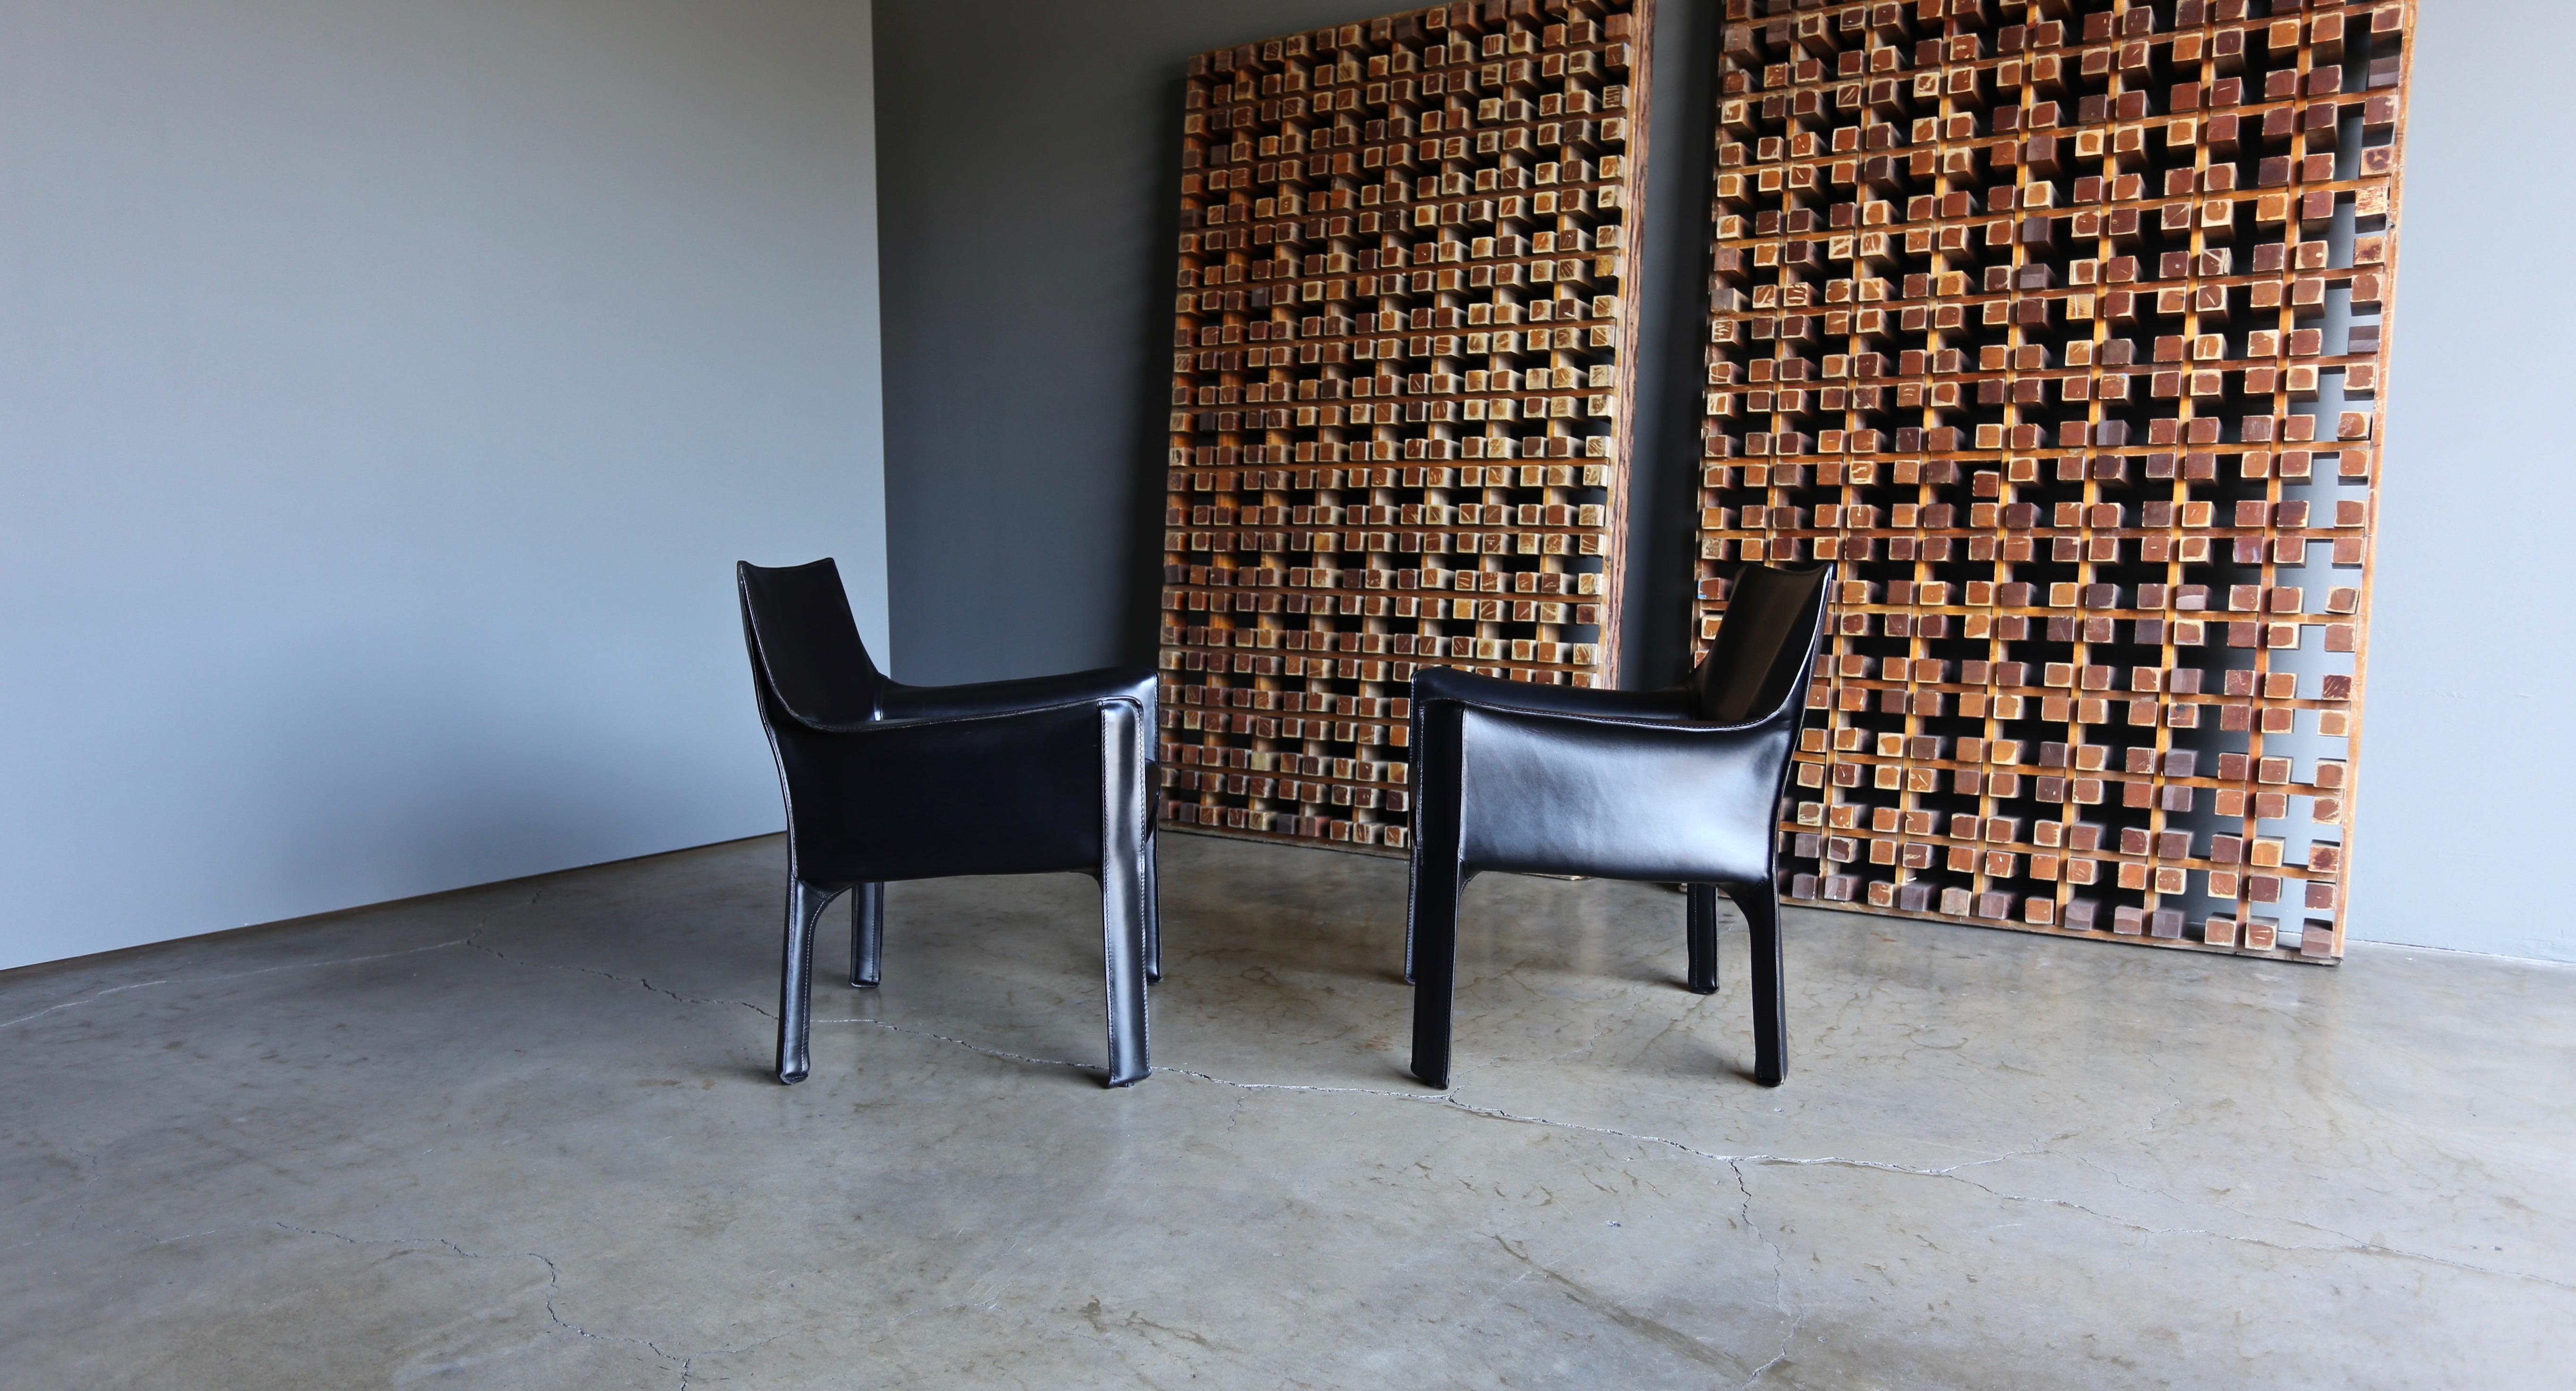 Mario Bellini 414 black leather cab lounge chairs for Cassina. This pair is in very good original condition.